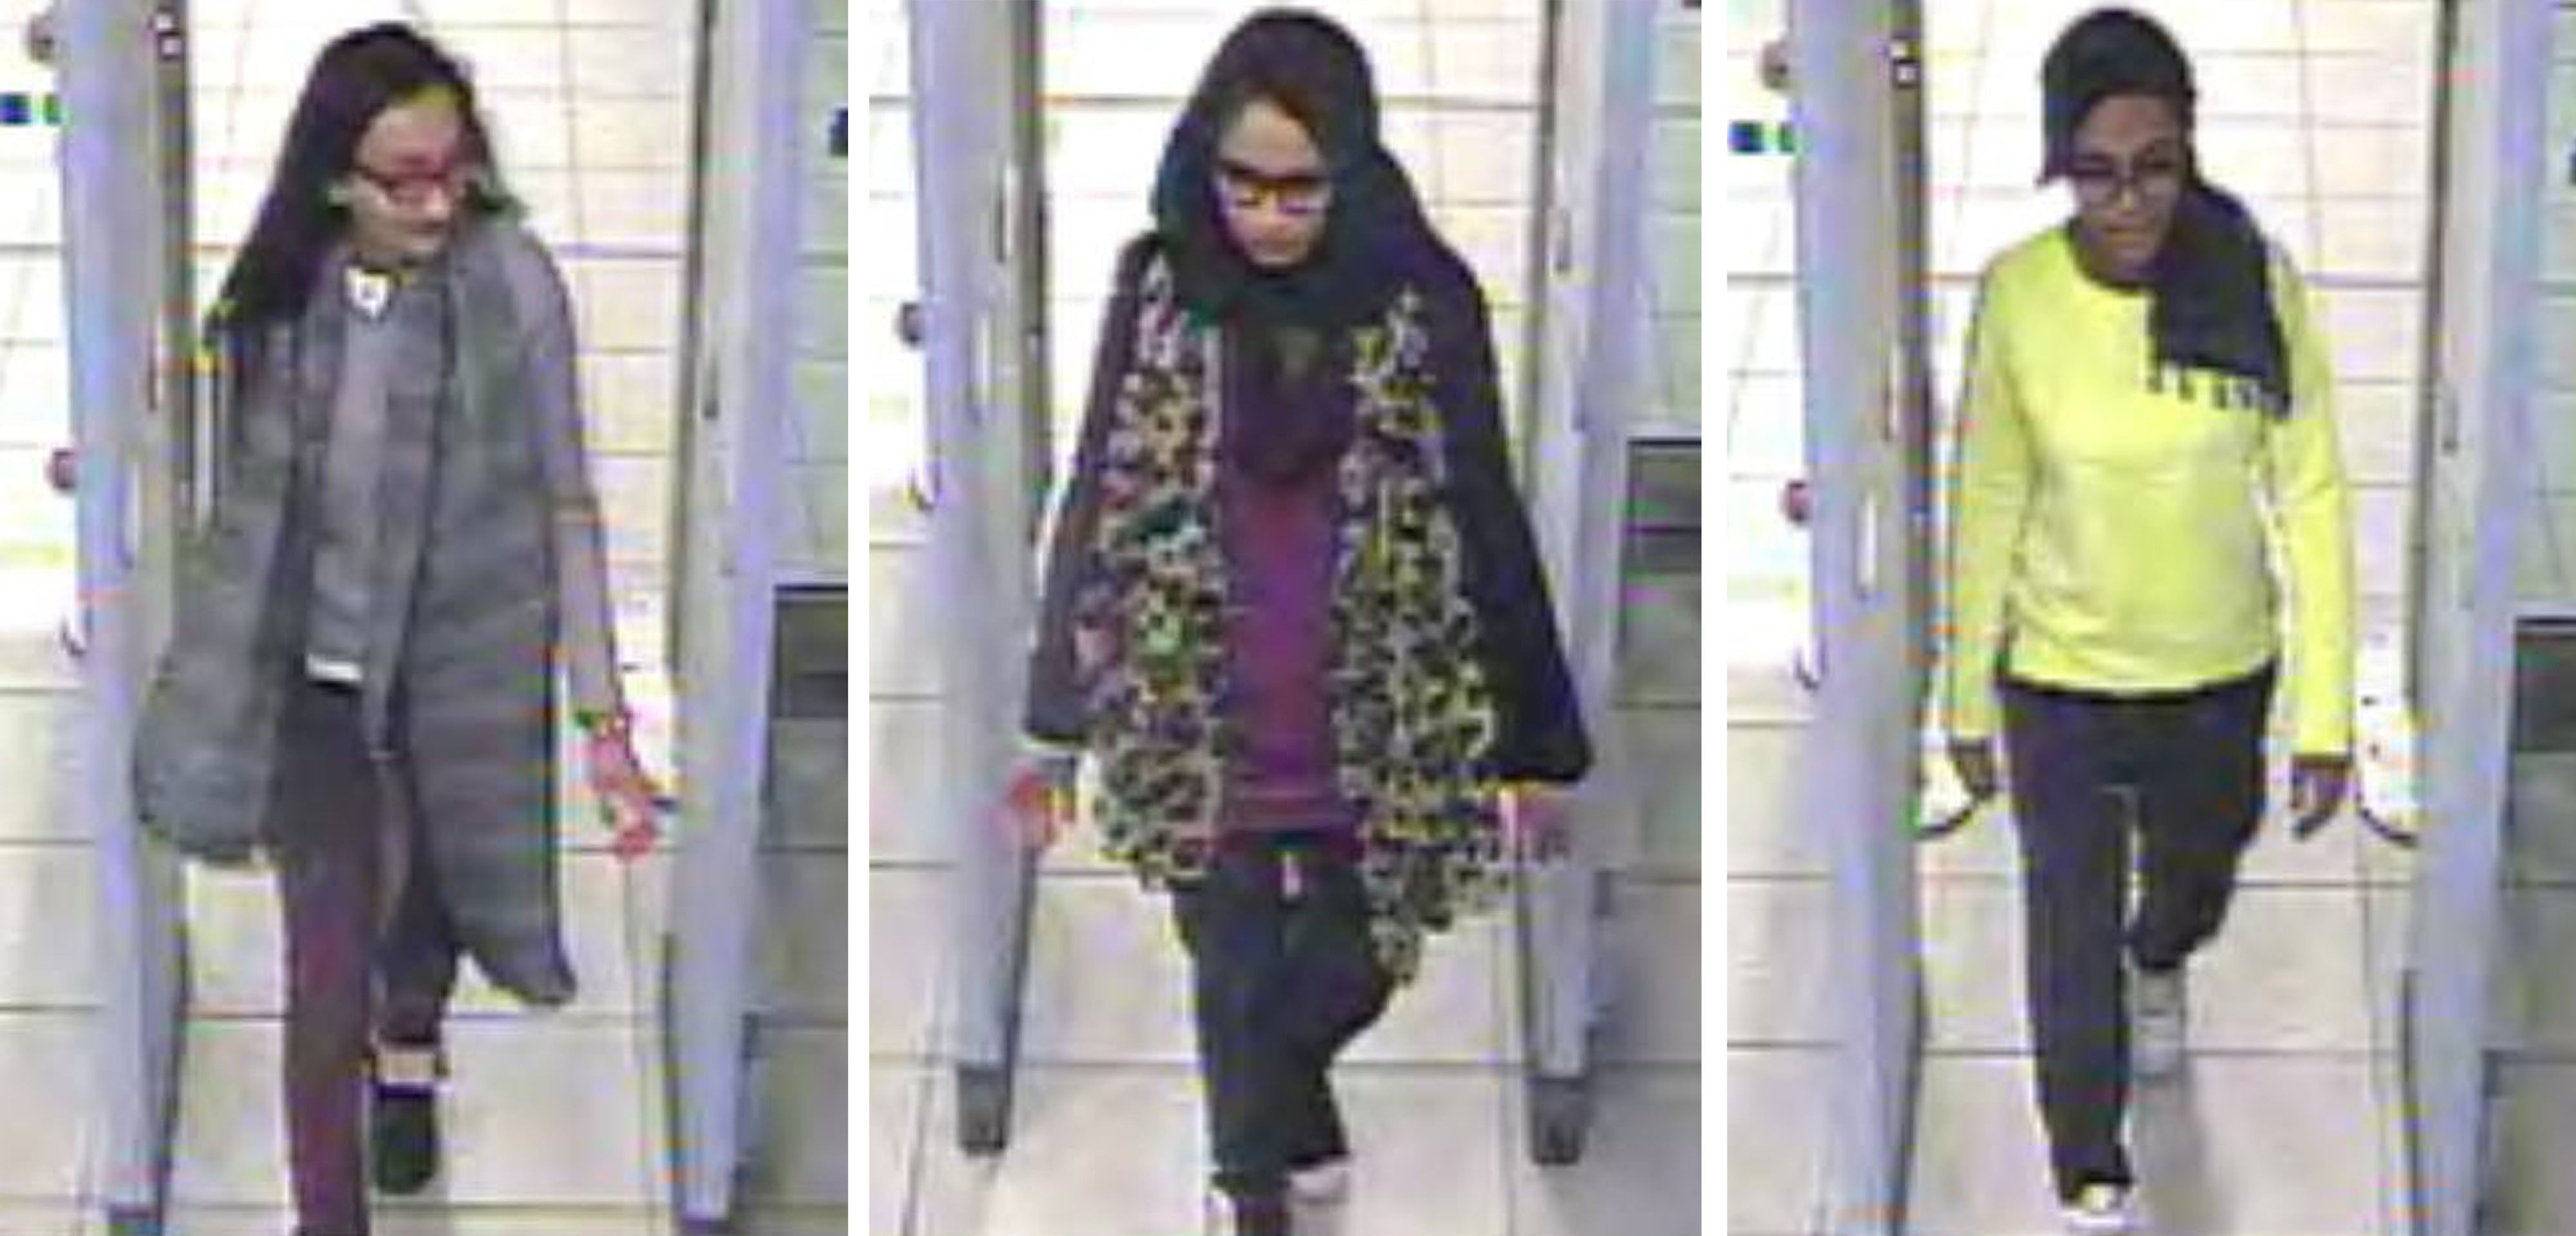 REVIEW OF THE DECADE Handout file comp of stills taken from CCTV issued by the Metropolitan Police of (left to right) Kadiza Sultana,16, Shamima Begum,15 and 15-year-old Amira Abase going through security at Gatwick airport, before they caught their flight to Turkey. The three schoolgirls believed to have fled to Syria to join Islamic State.